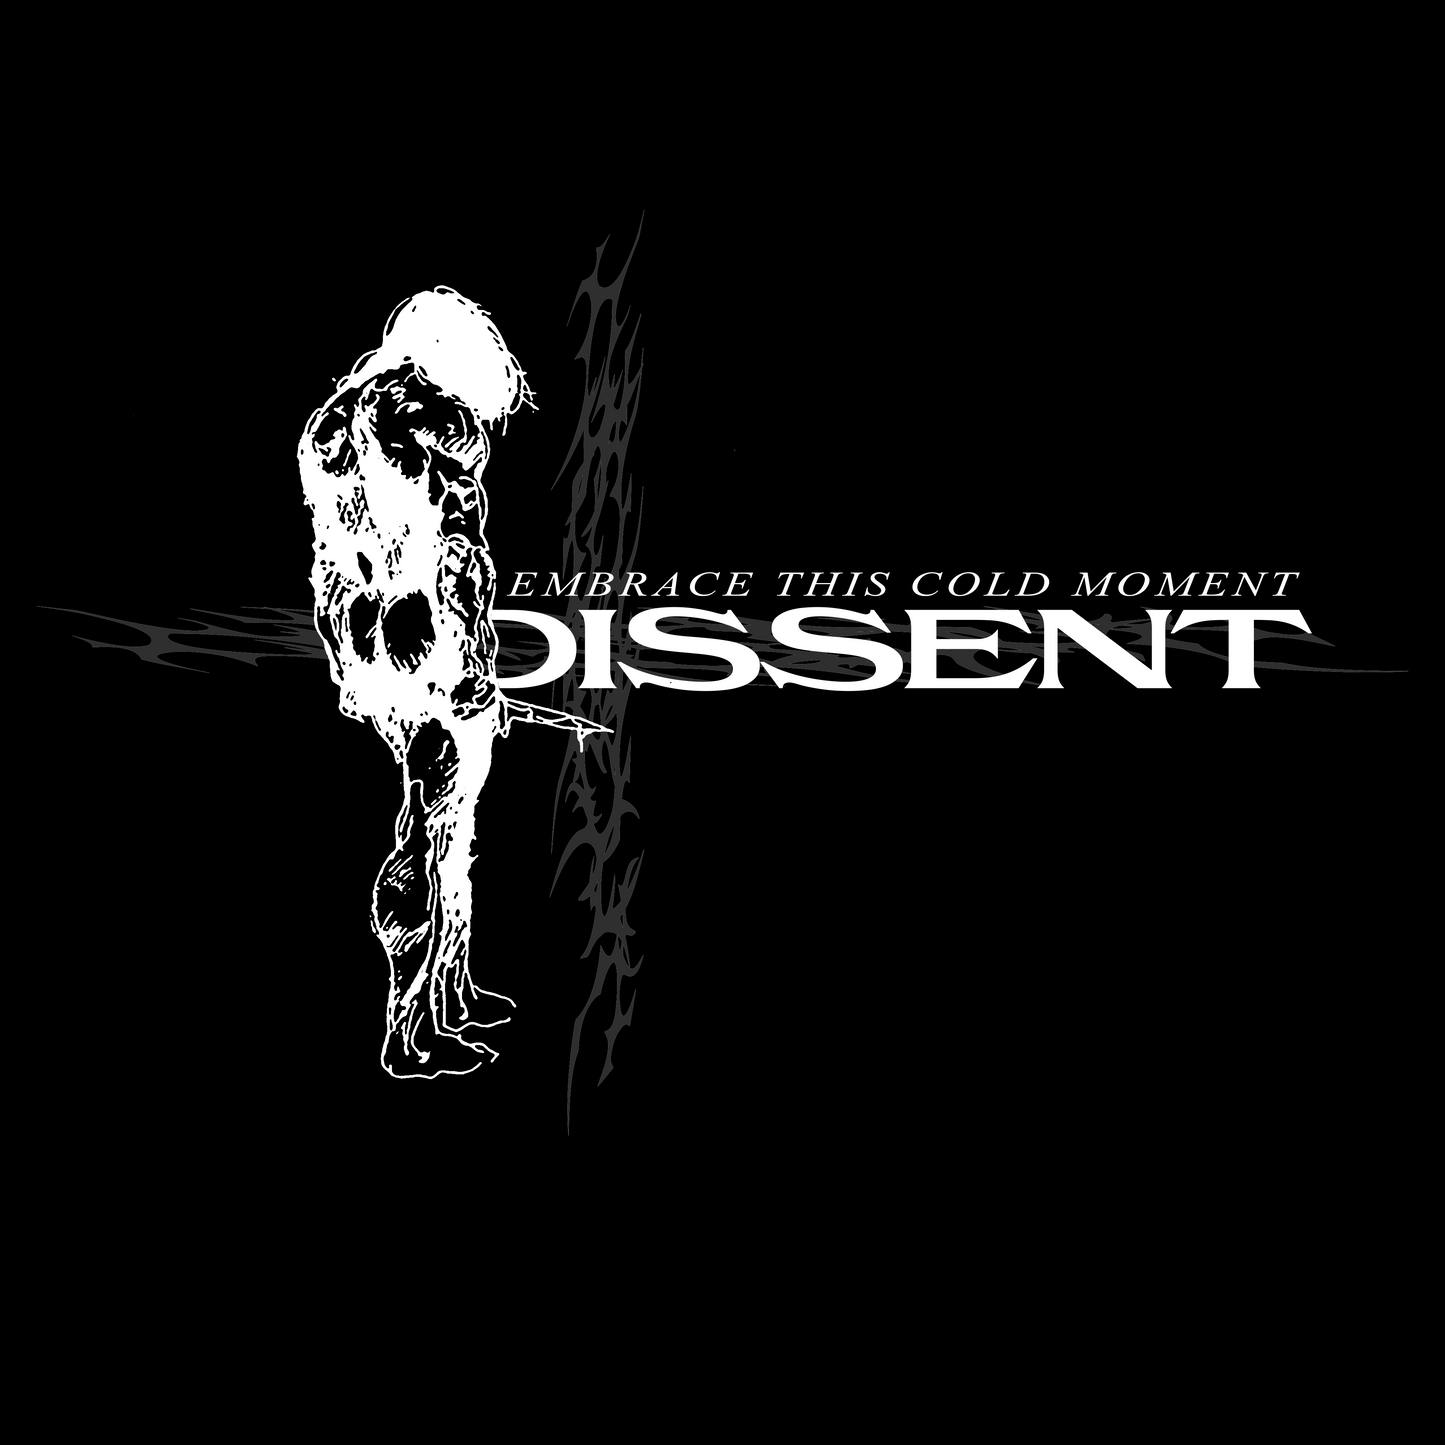 DISSENT - EMBRACE THIS COLD MOMENT